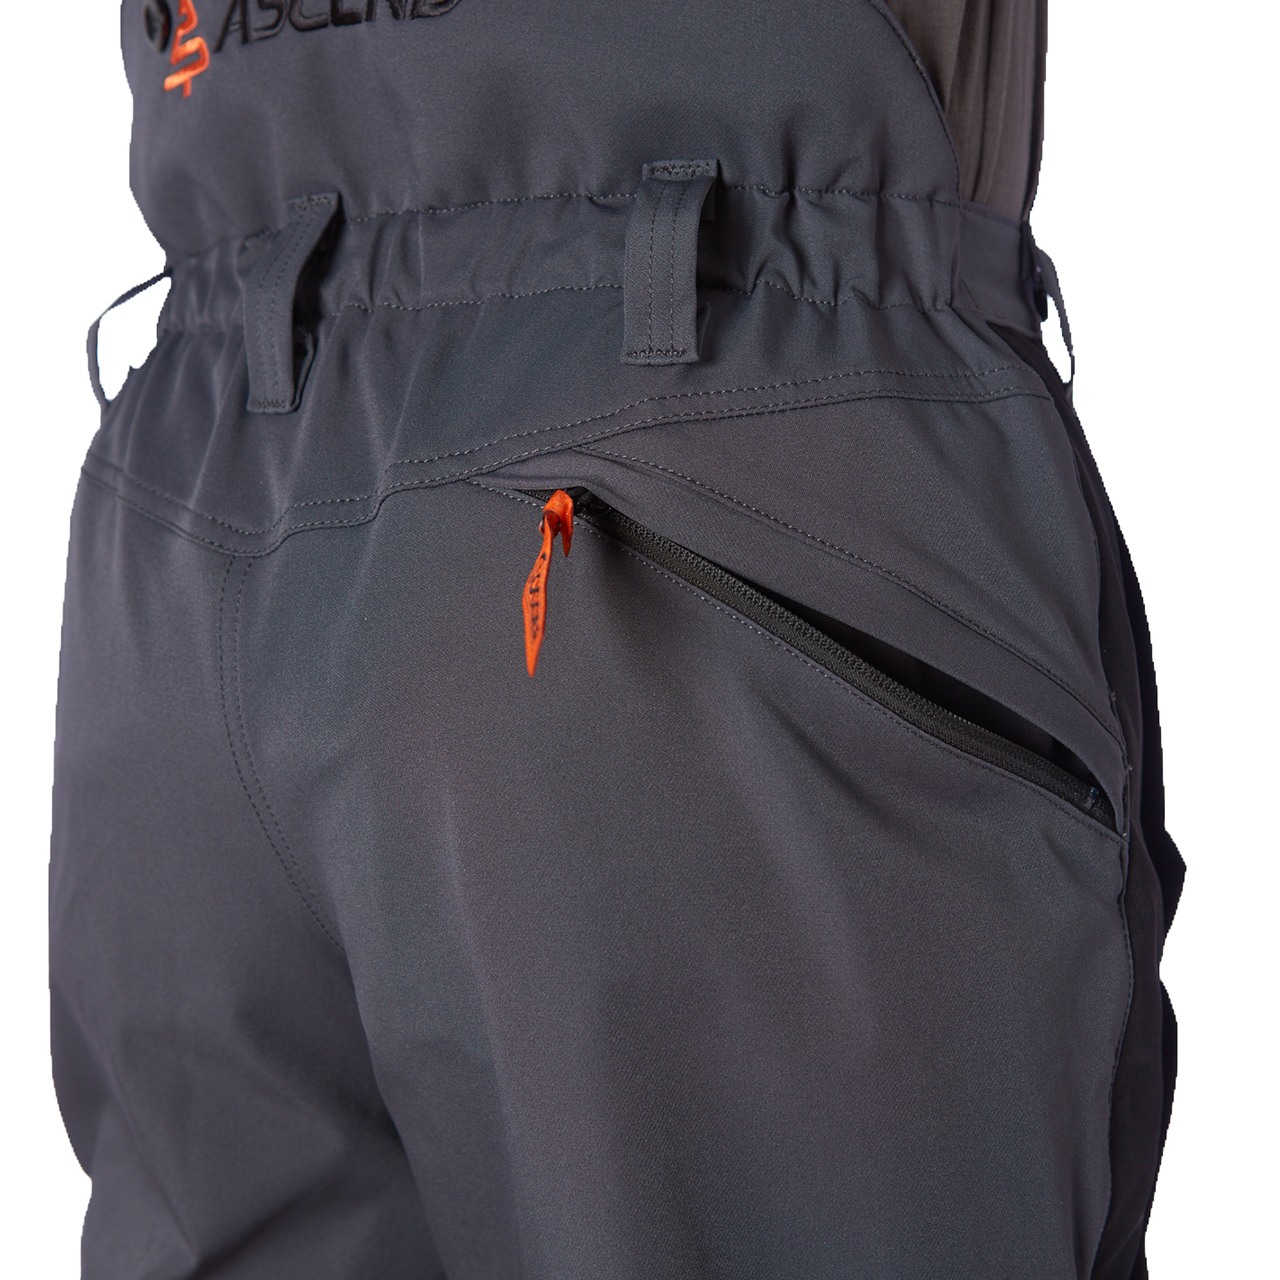 Clogger Ascend All Season Men's Chainsaw Pants - Lowest prices & free  shipping